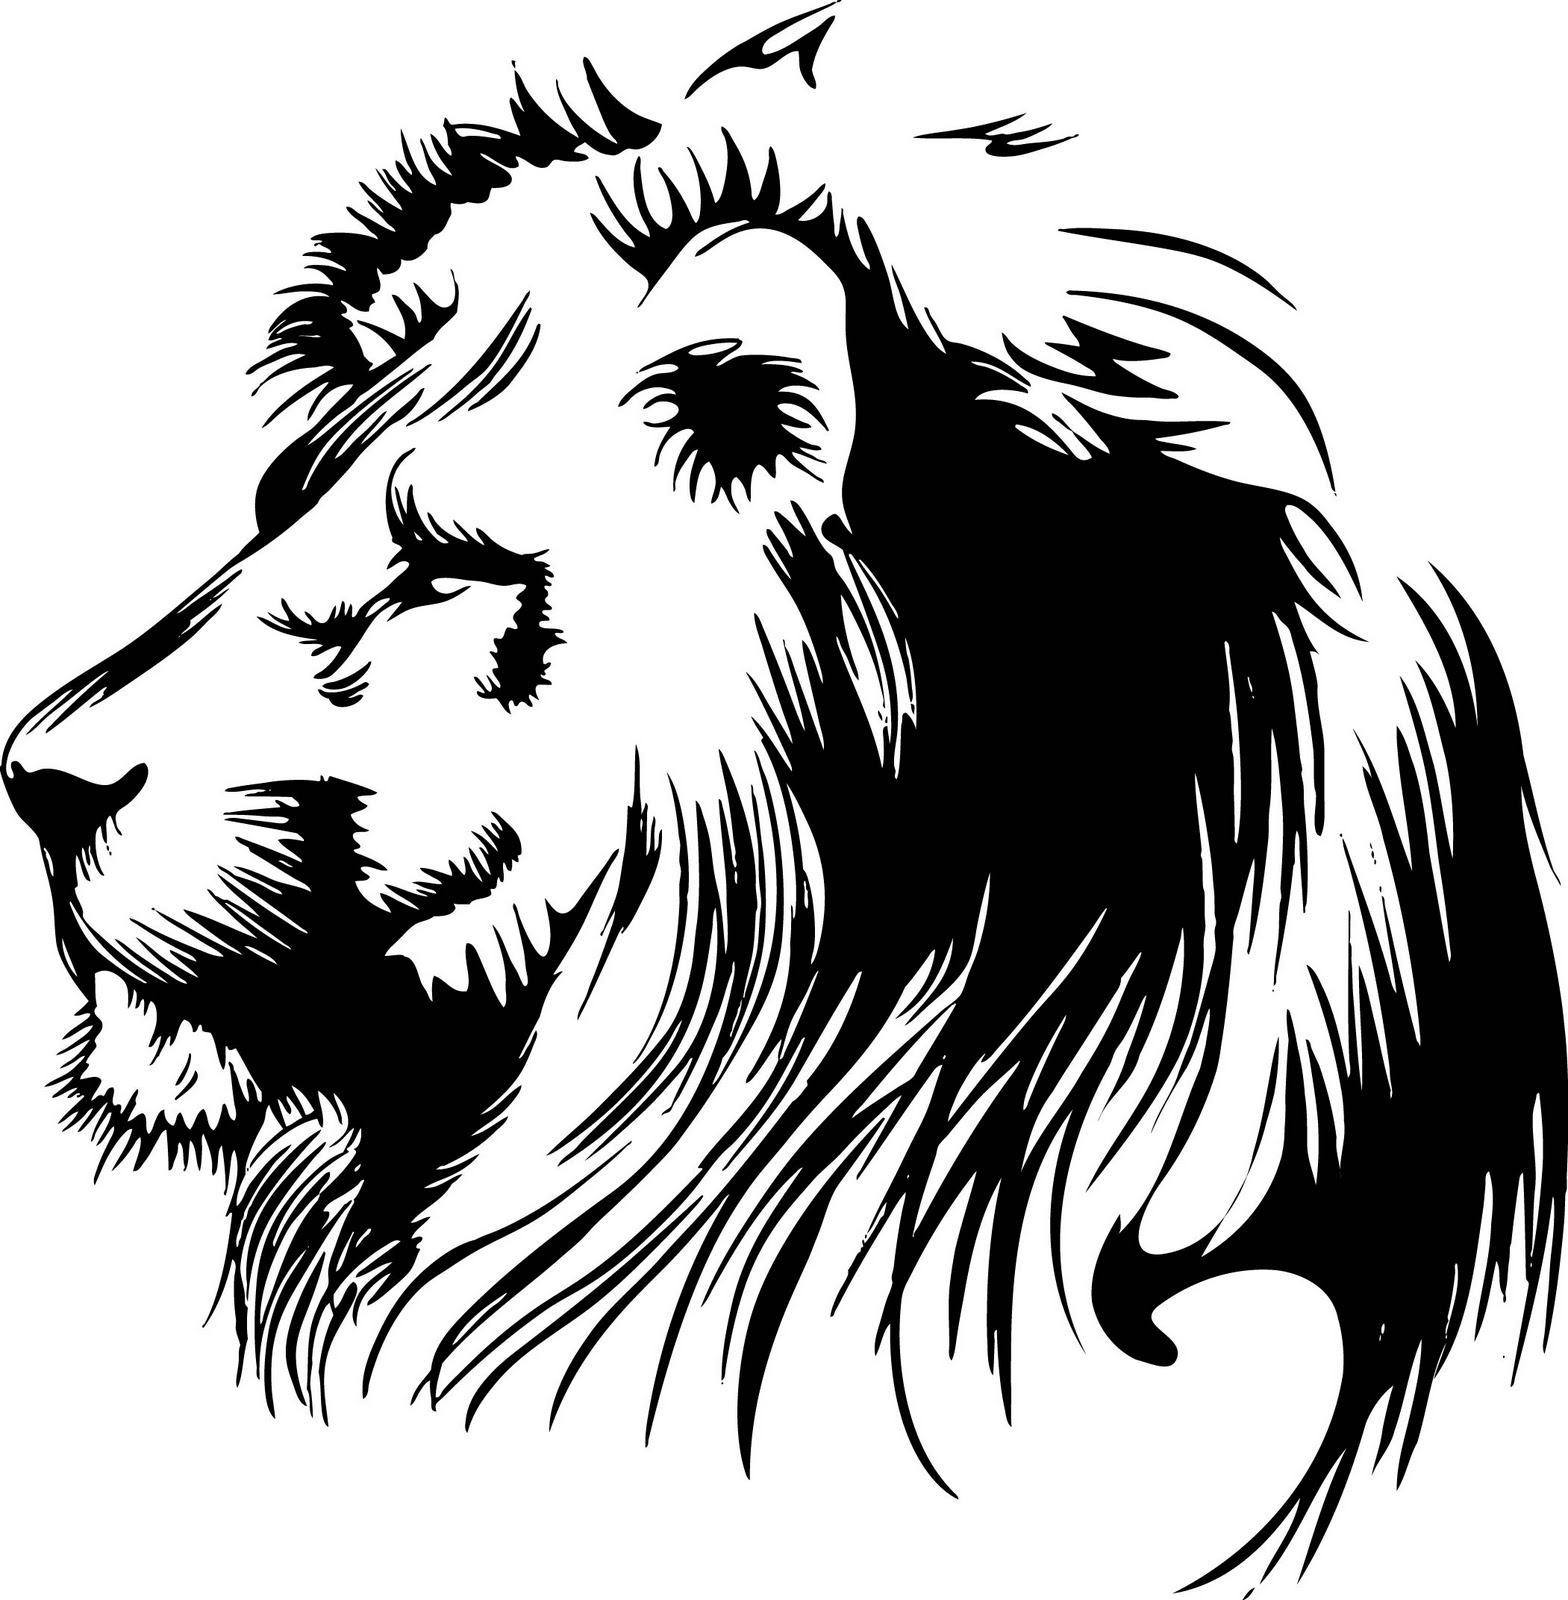 11 PSD Black Lion Images - Bob Marley and Lion, Reggae Lion and South